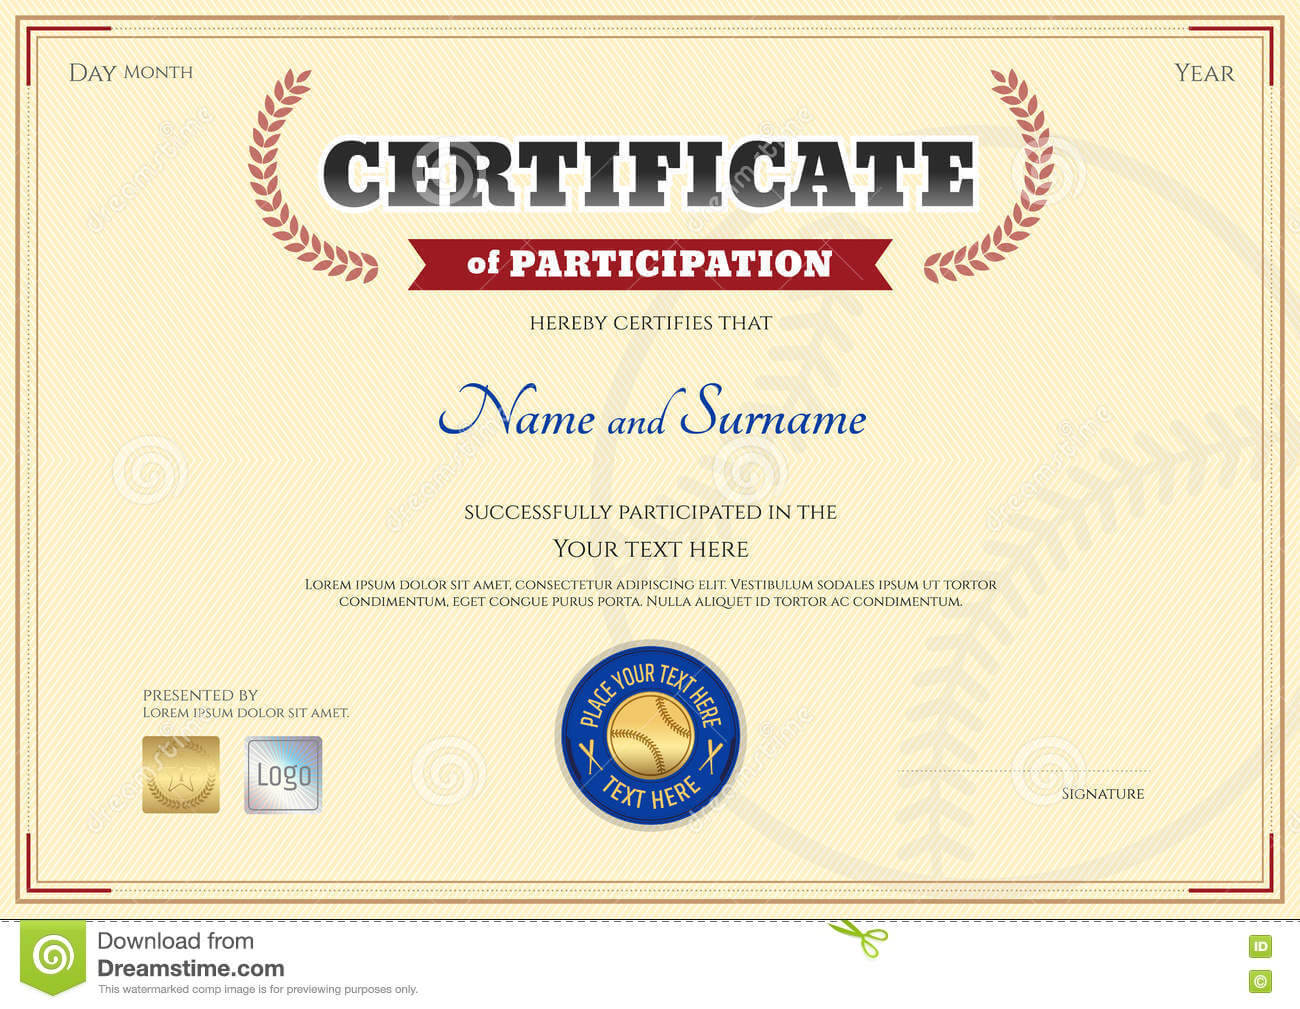 Certificate Of Participation Template In Baseball Sport Within Sports Day Certificate Templates Free